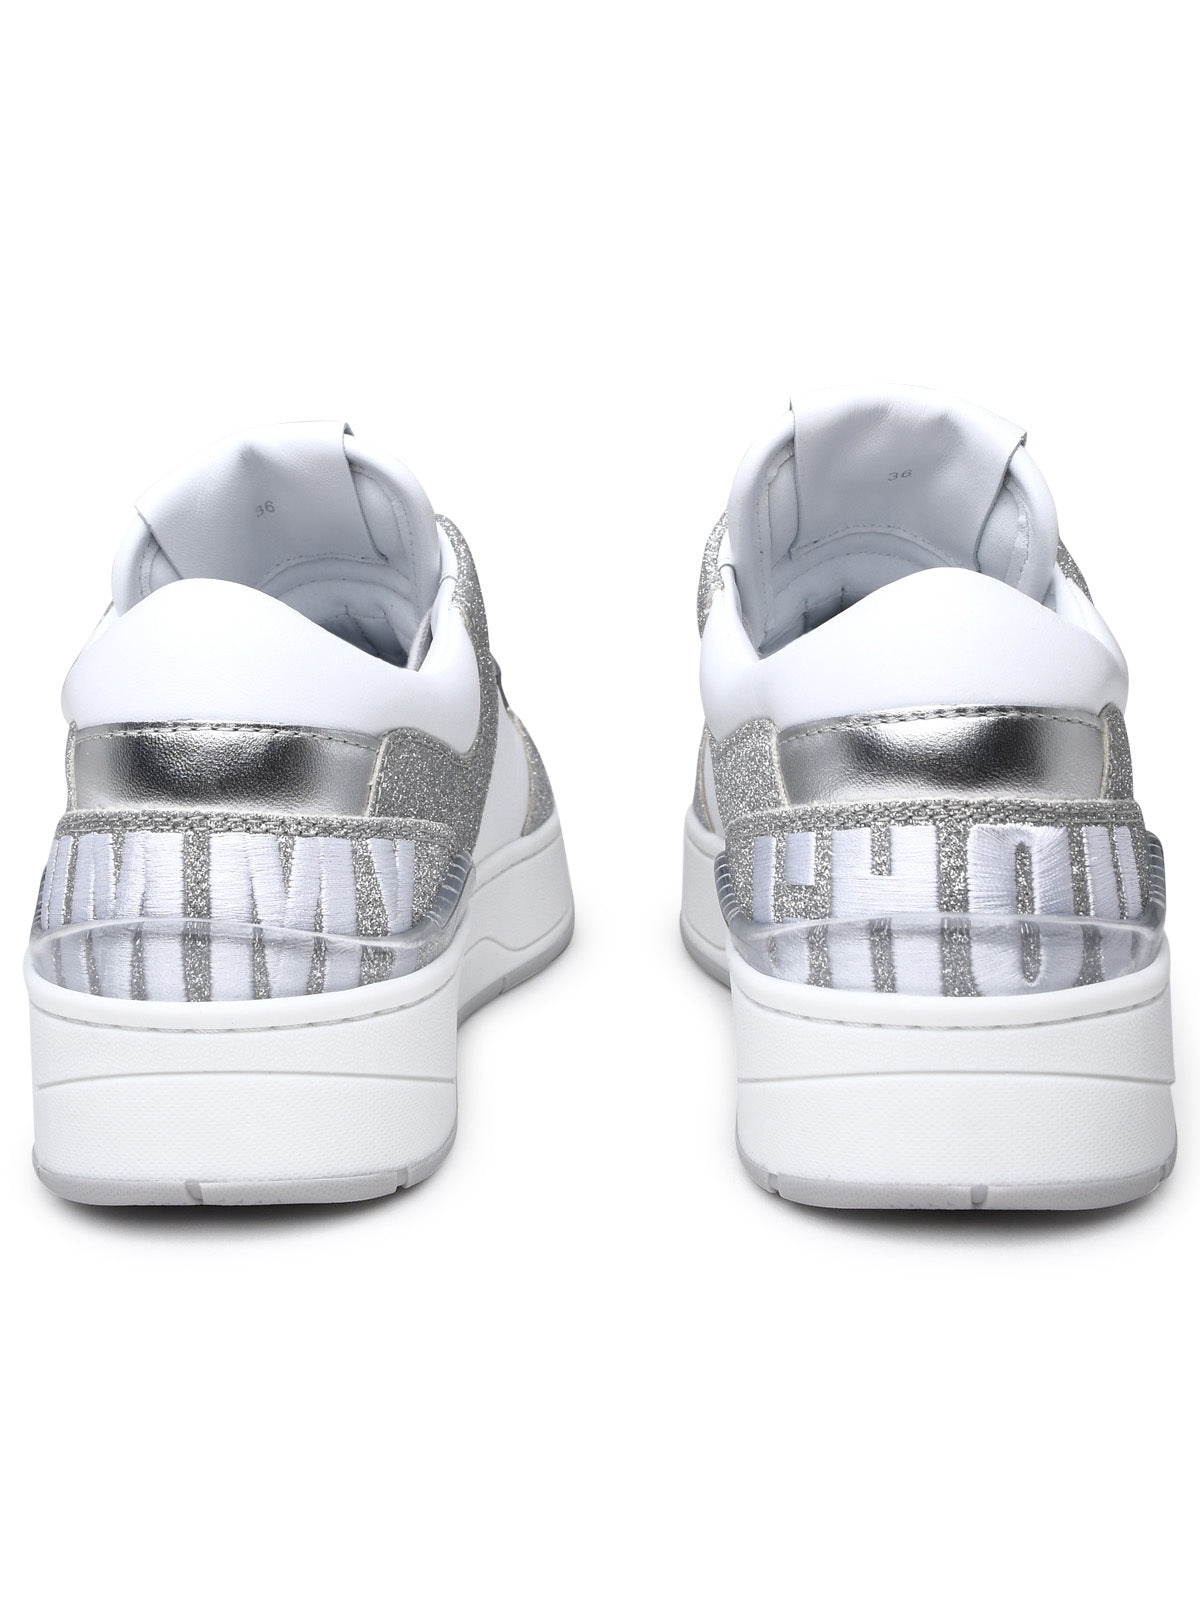 Jimmy Choo Woman Cashmere White Leather Sneakers - 4